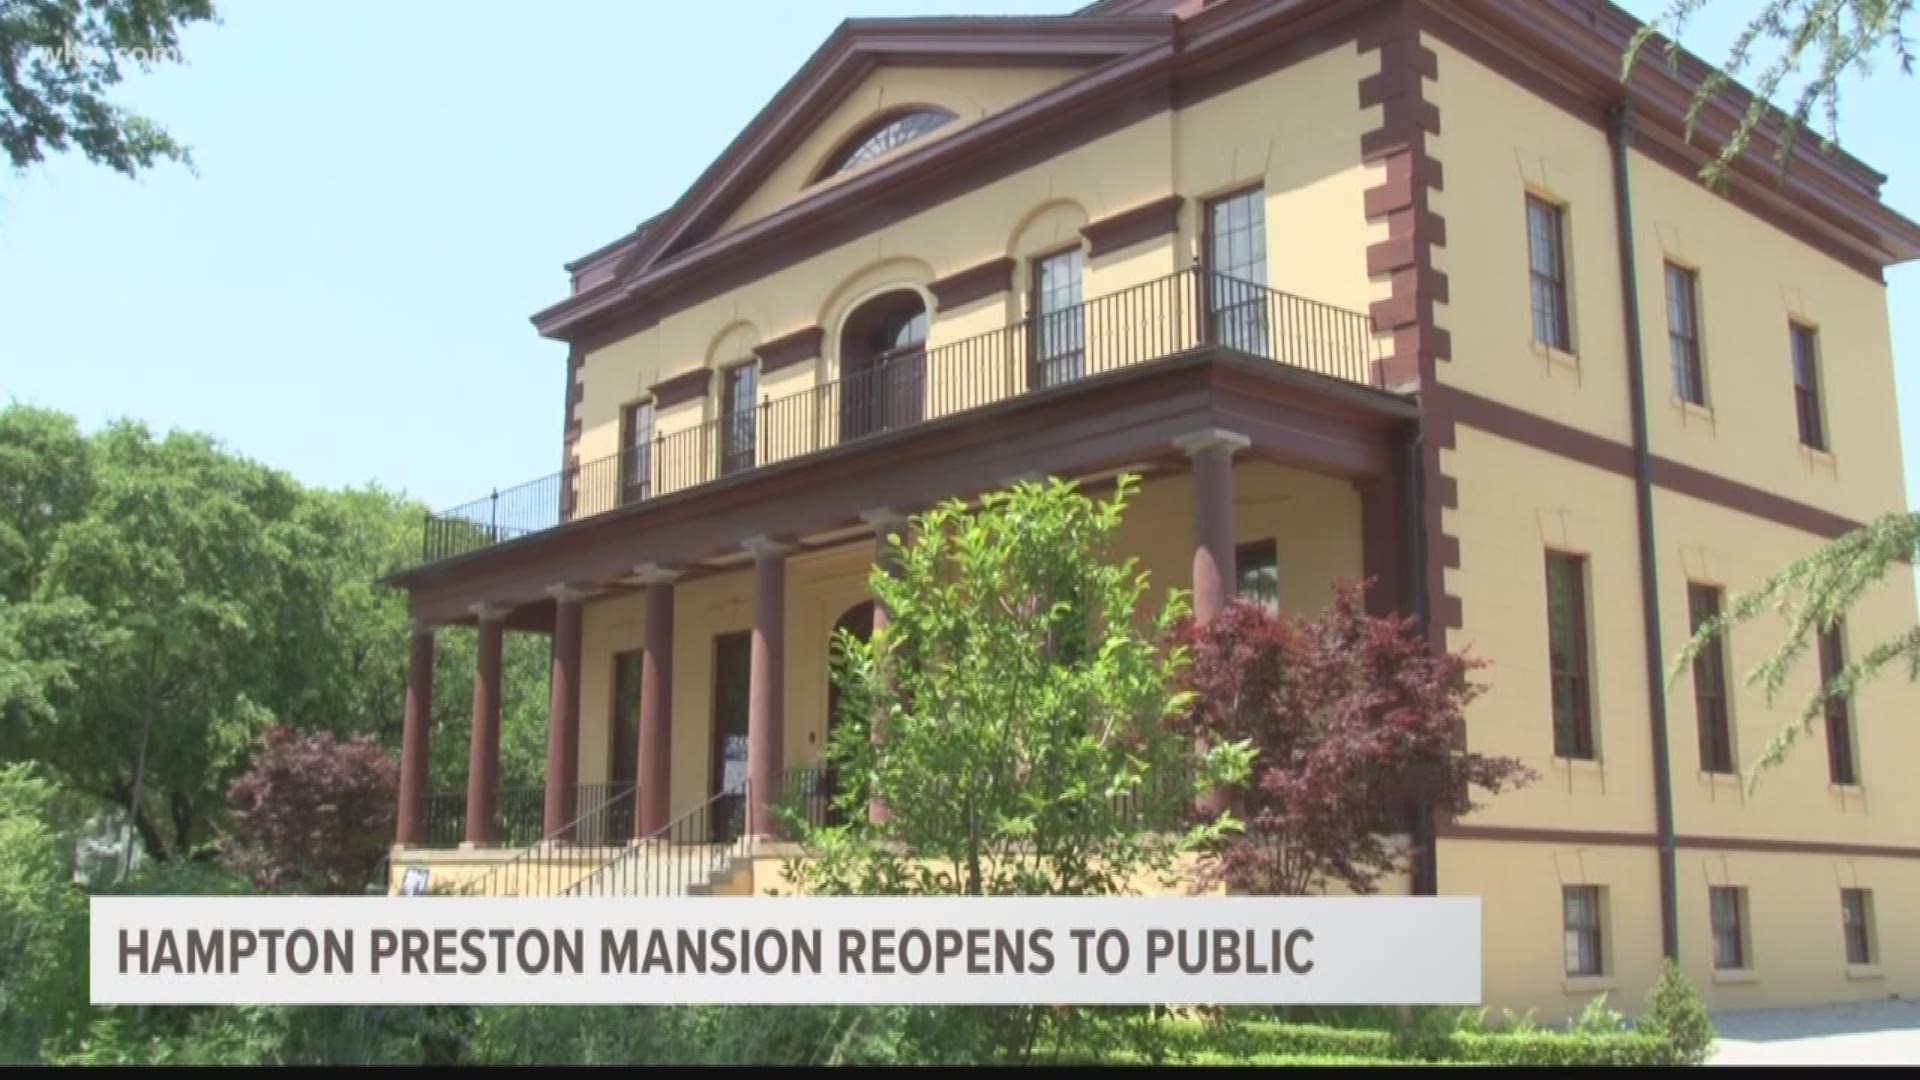 The Hampton Preston Mansion in Columbia reopened to the public on Saturday.